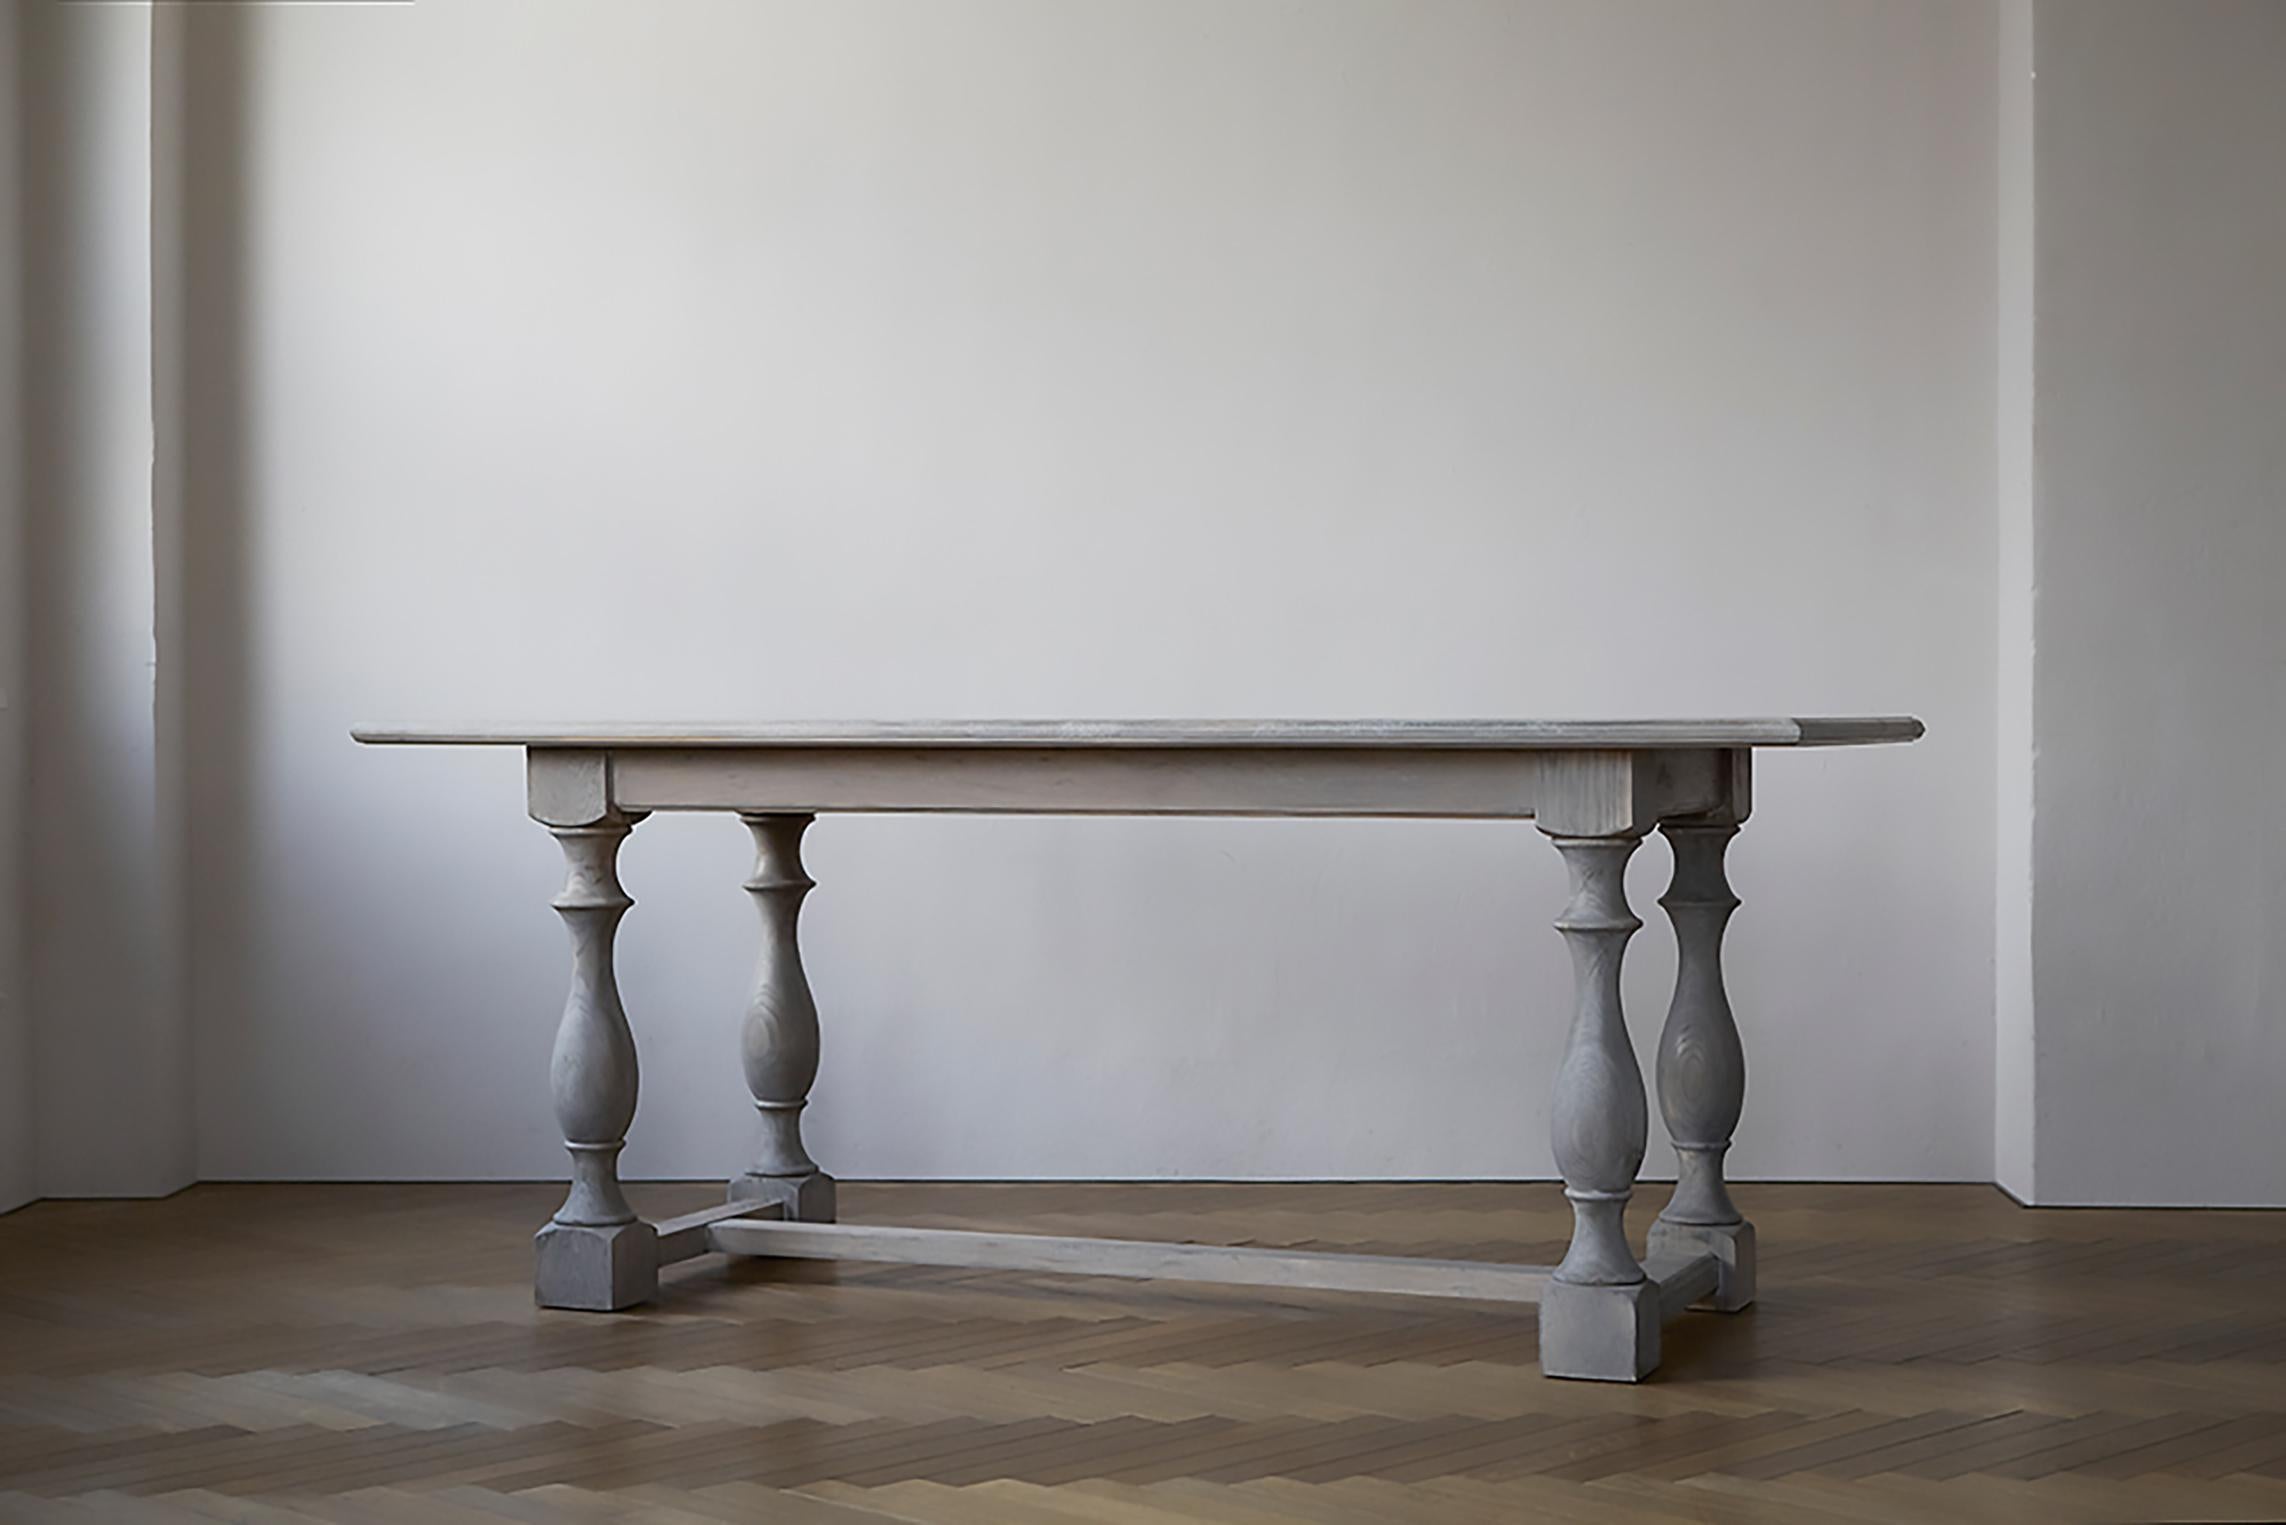 Inspired by a 17th century French abbey table, this dining table has been redesigned to fit in with modern shops and homes. The table is made of solid wood and the curved legs are carefully carved by a wheelwright to give it a classical